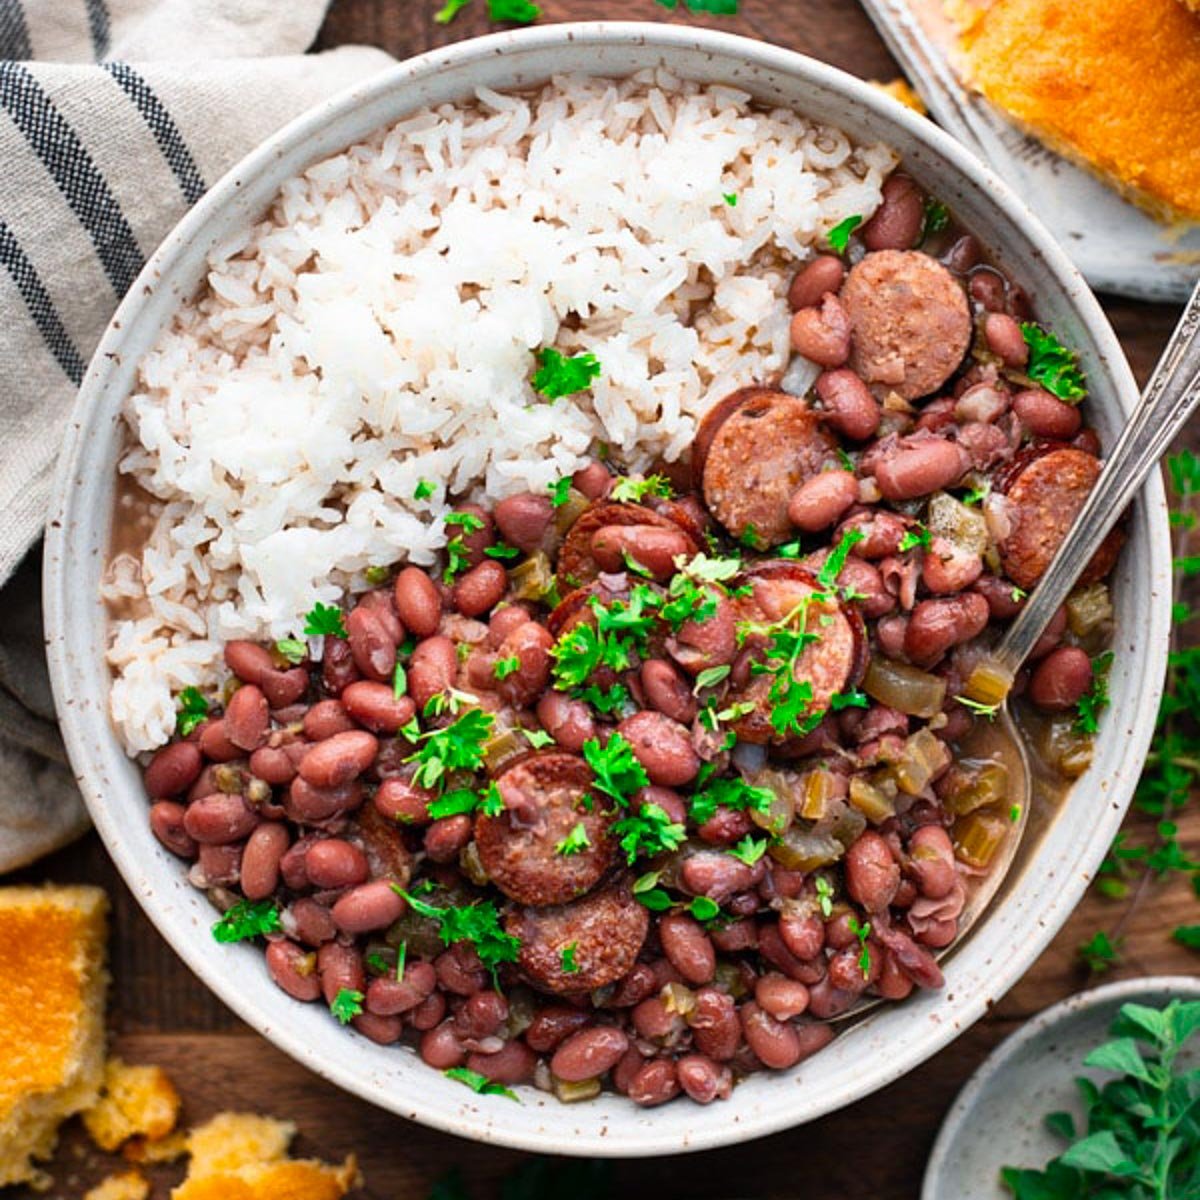 Best Red Beans & Rice Recipe - How To Make Louisiana-Style Red Beans & Rice